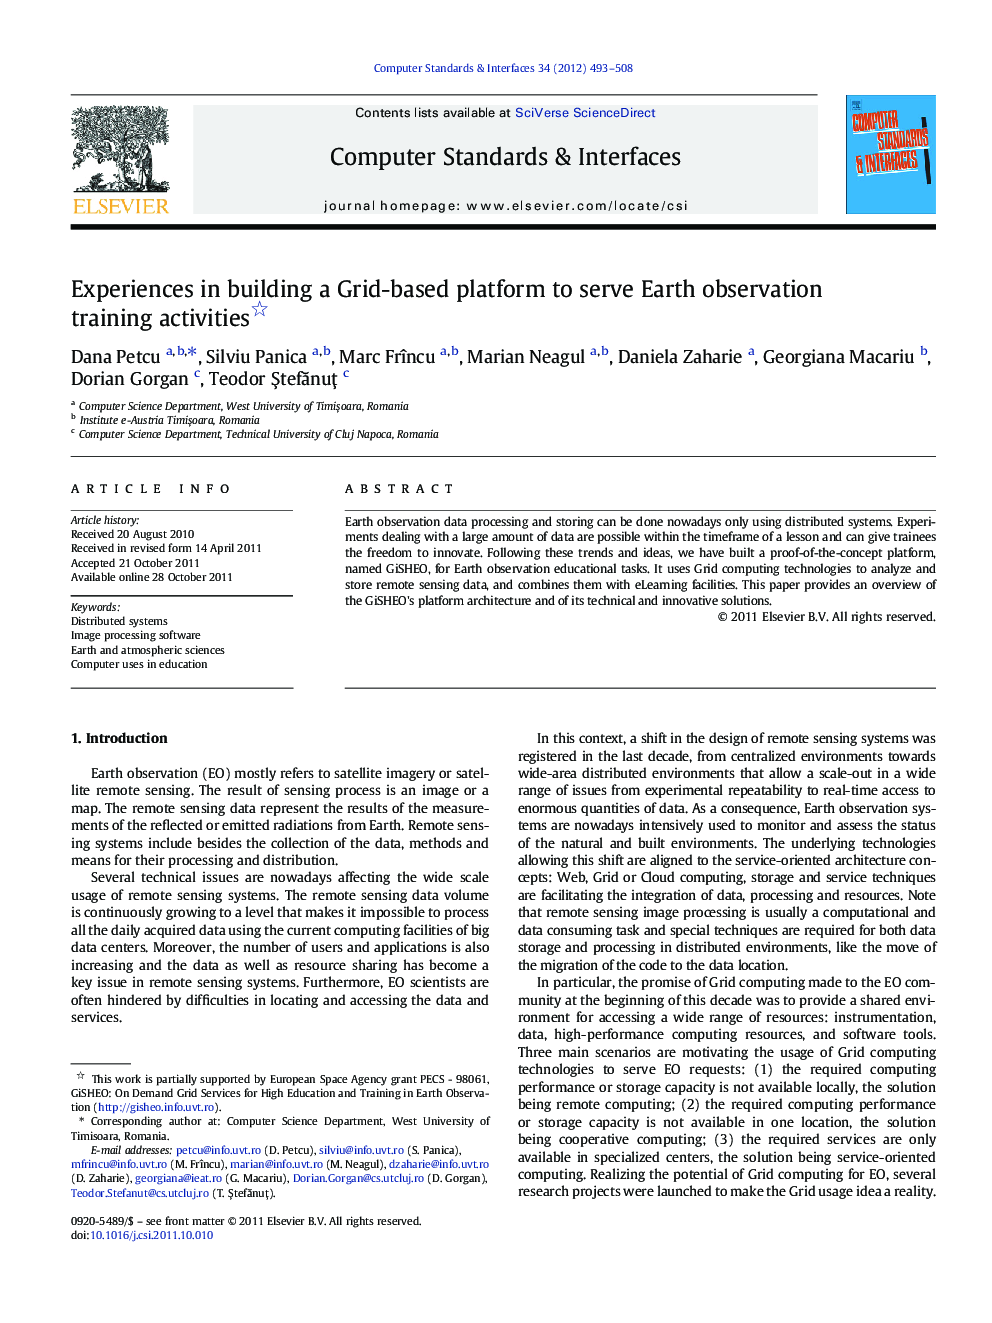 Experiences in building a Grid-based platform to serve Earth observation training activities 